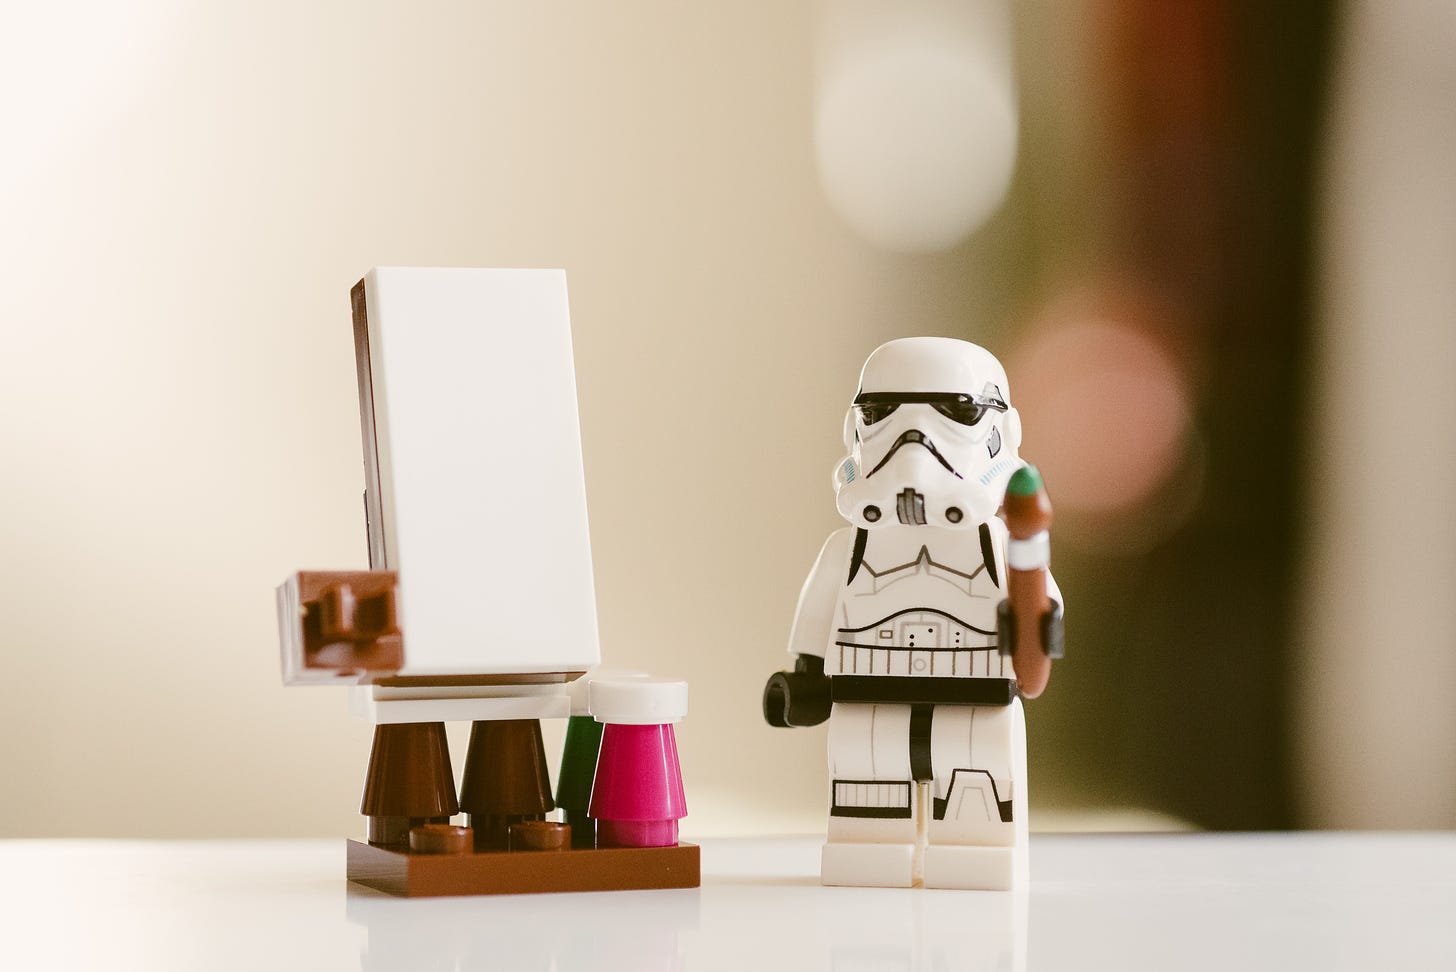 Lego Stormtrooper stands in front of blank canvas